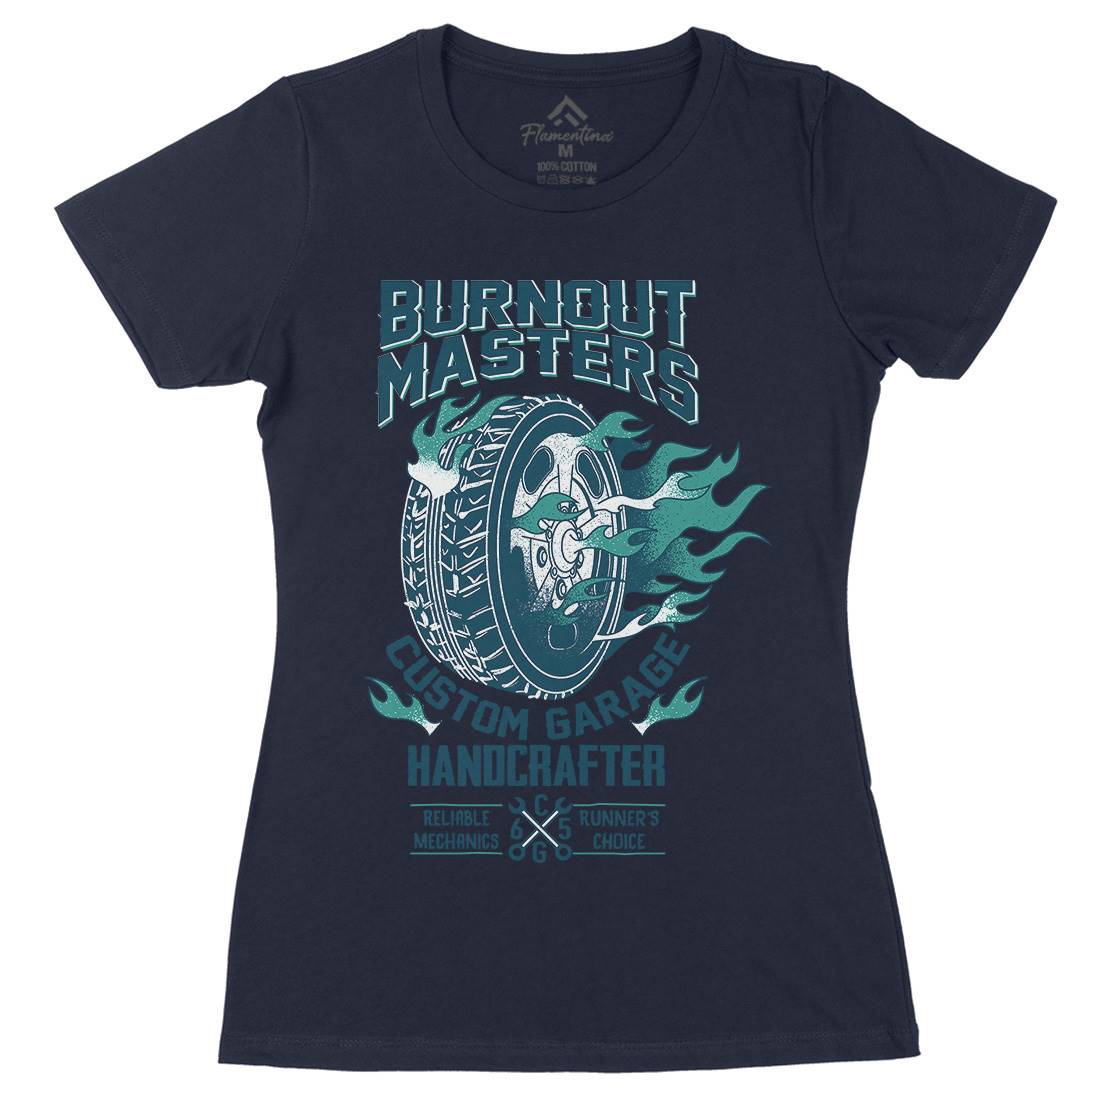 Burnout Masters Womens Organic Crew Neck T-Shirt Motorcycles A986